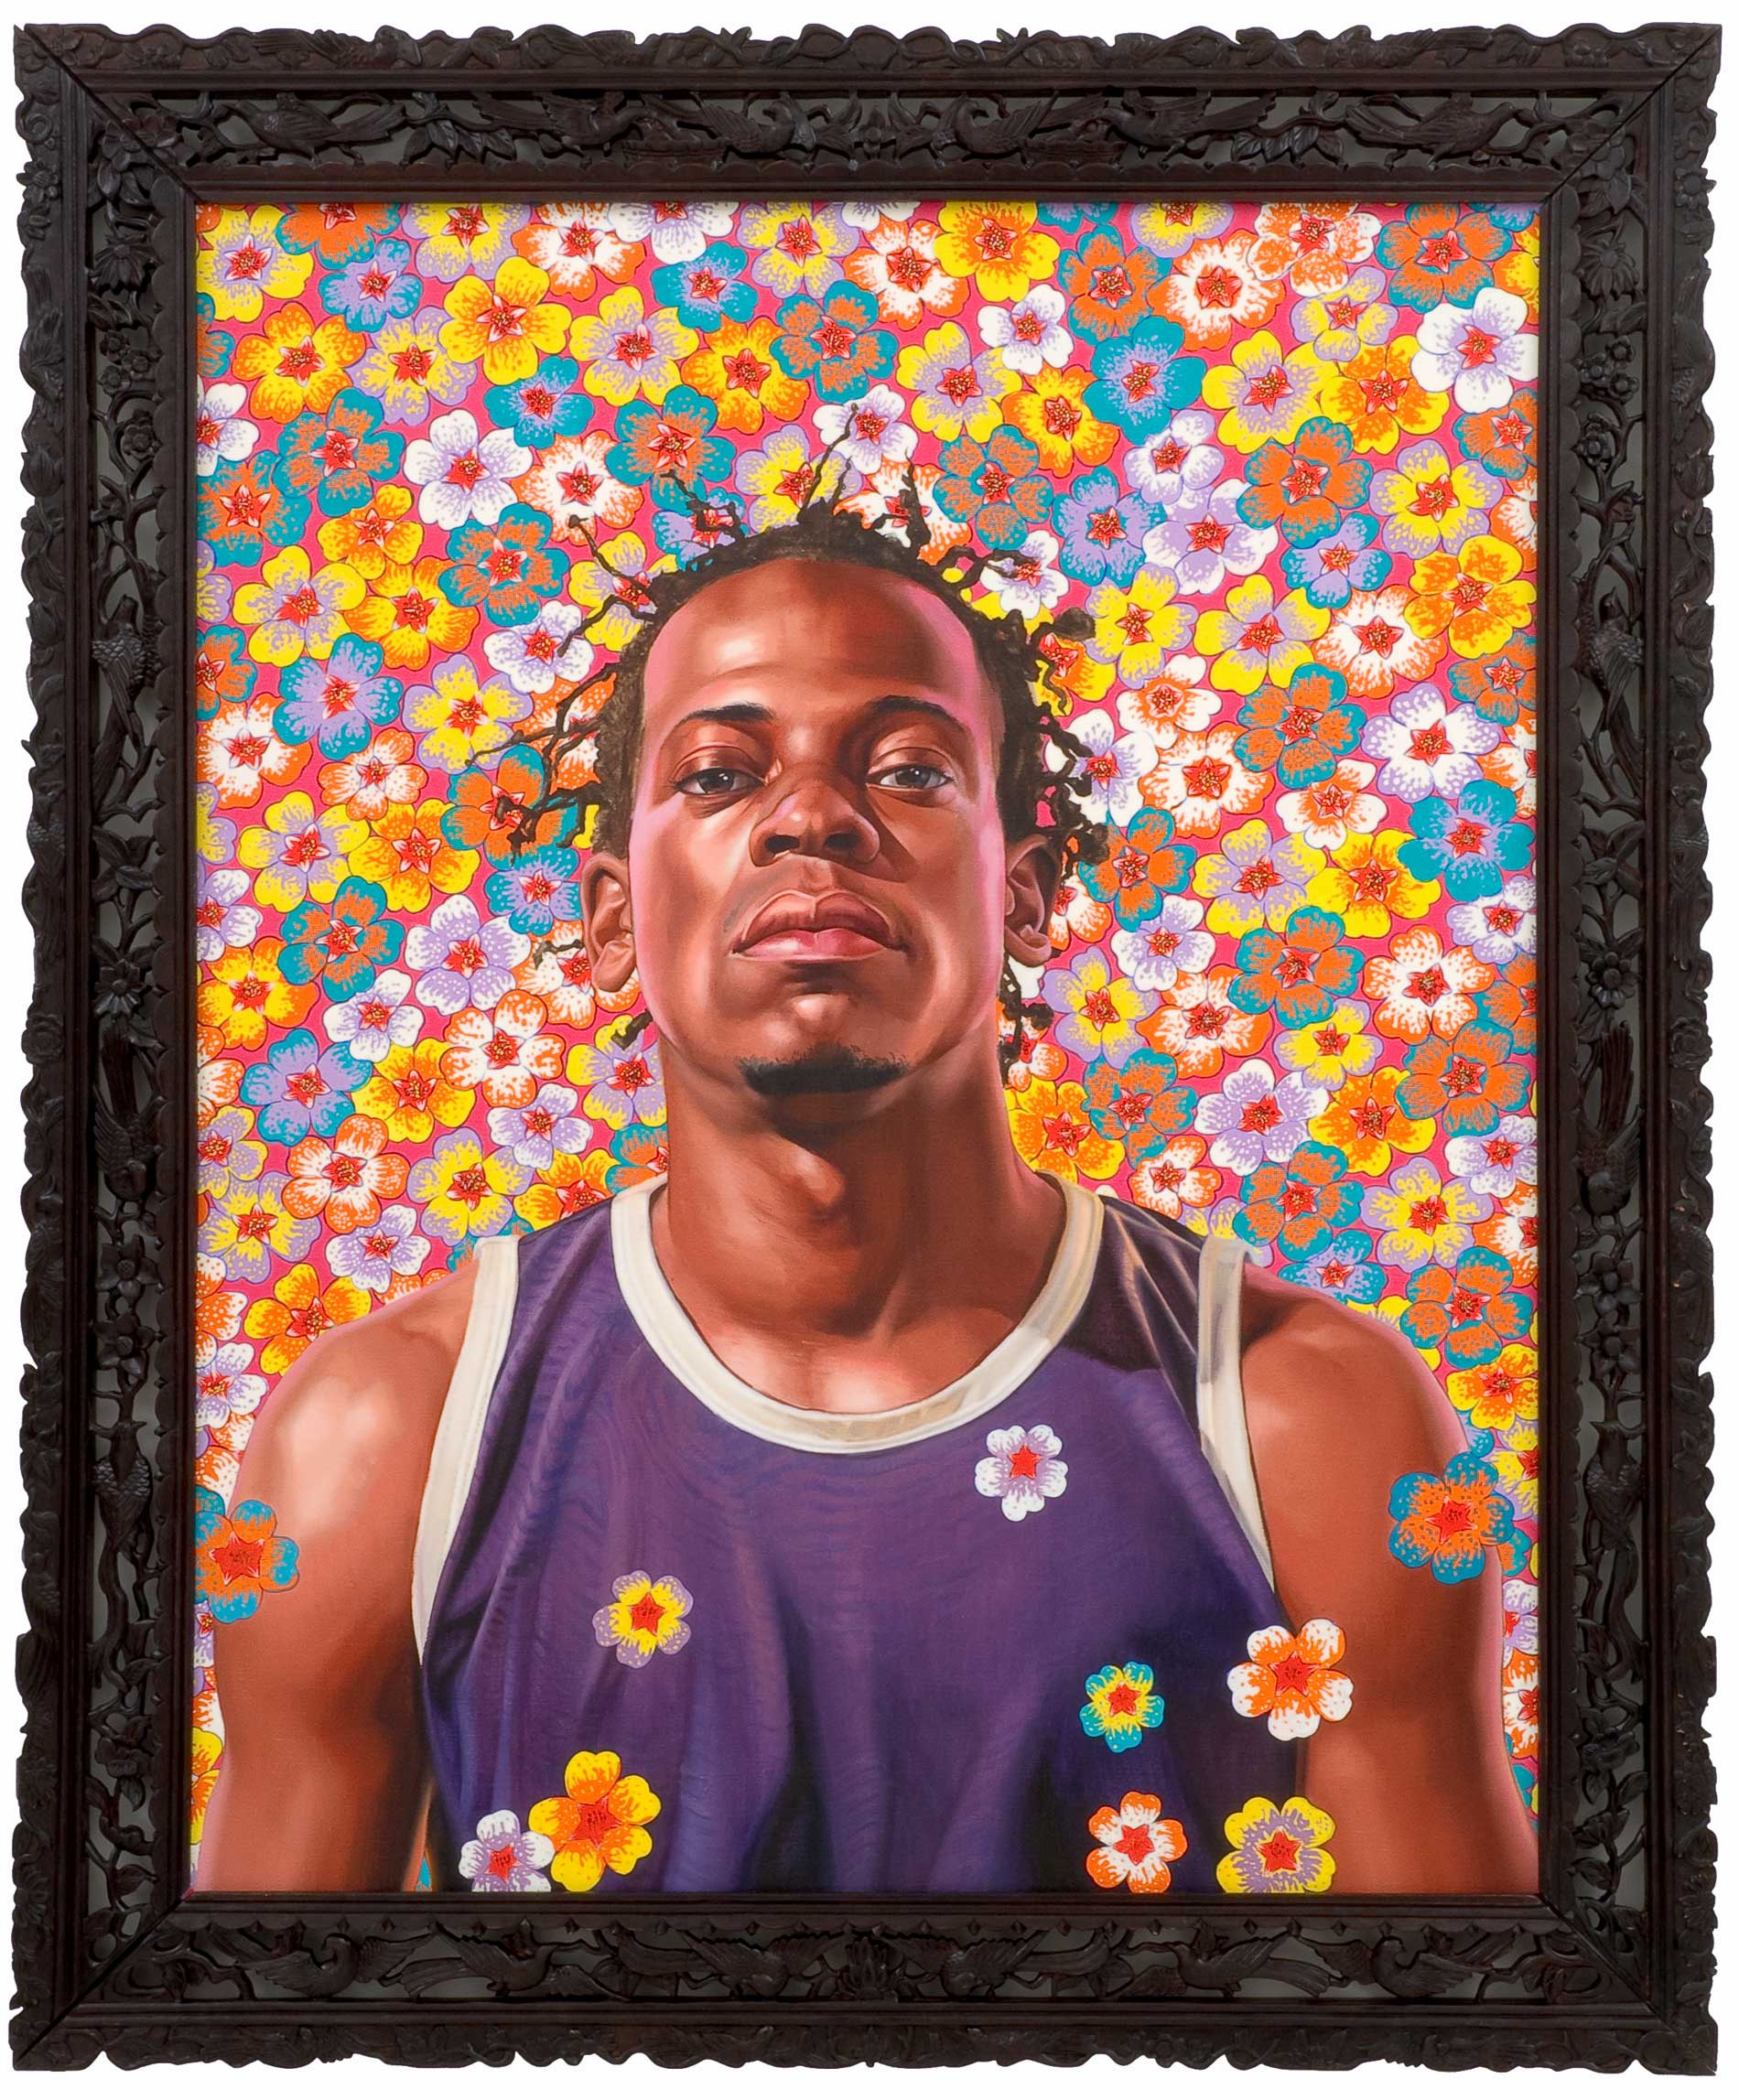 Kehinde Wiley | The World Stage: Brazil | Nelson Silva Eaflanzino Jr., 2009 Oil on Canvas. | 2